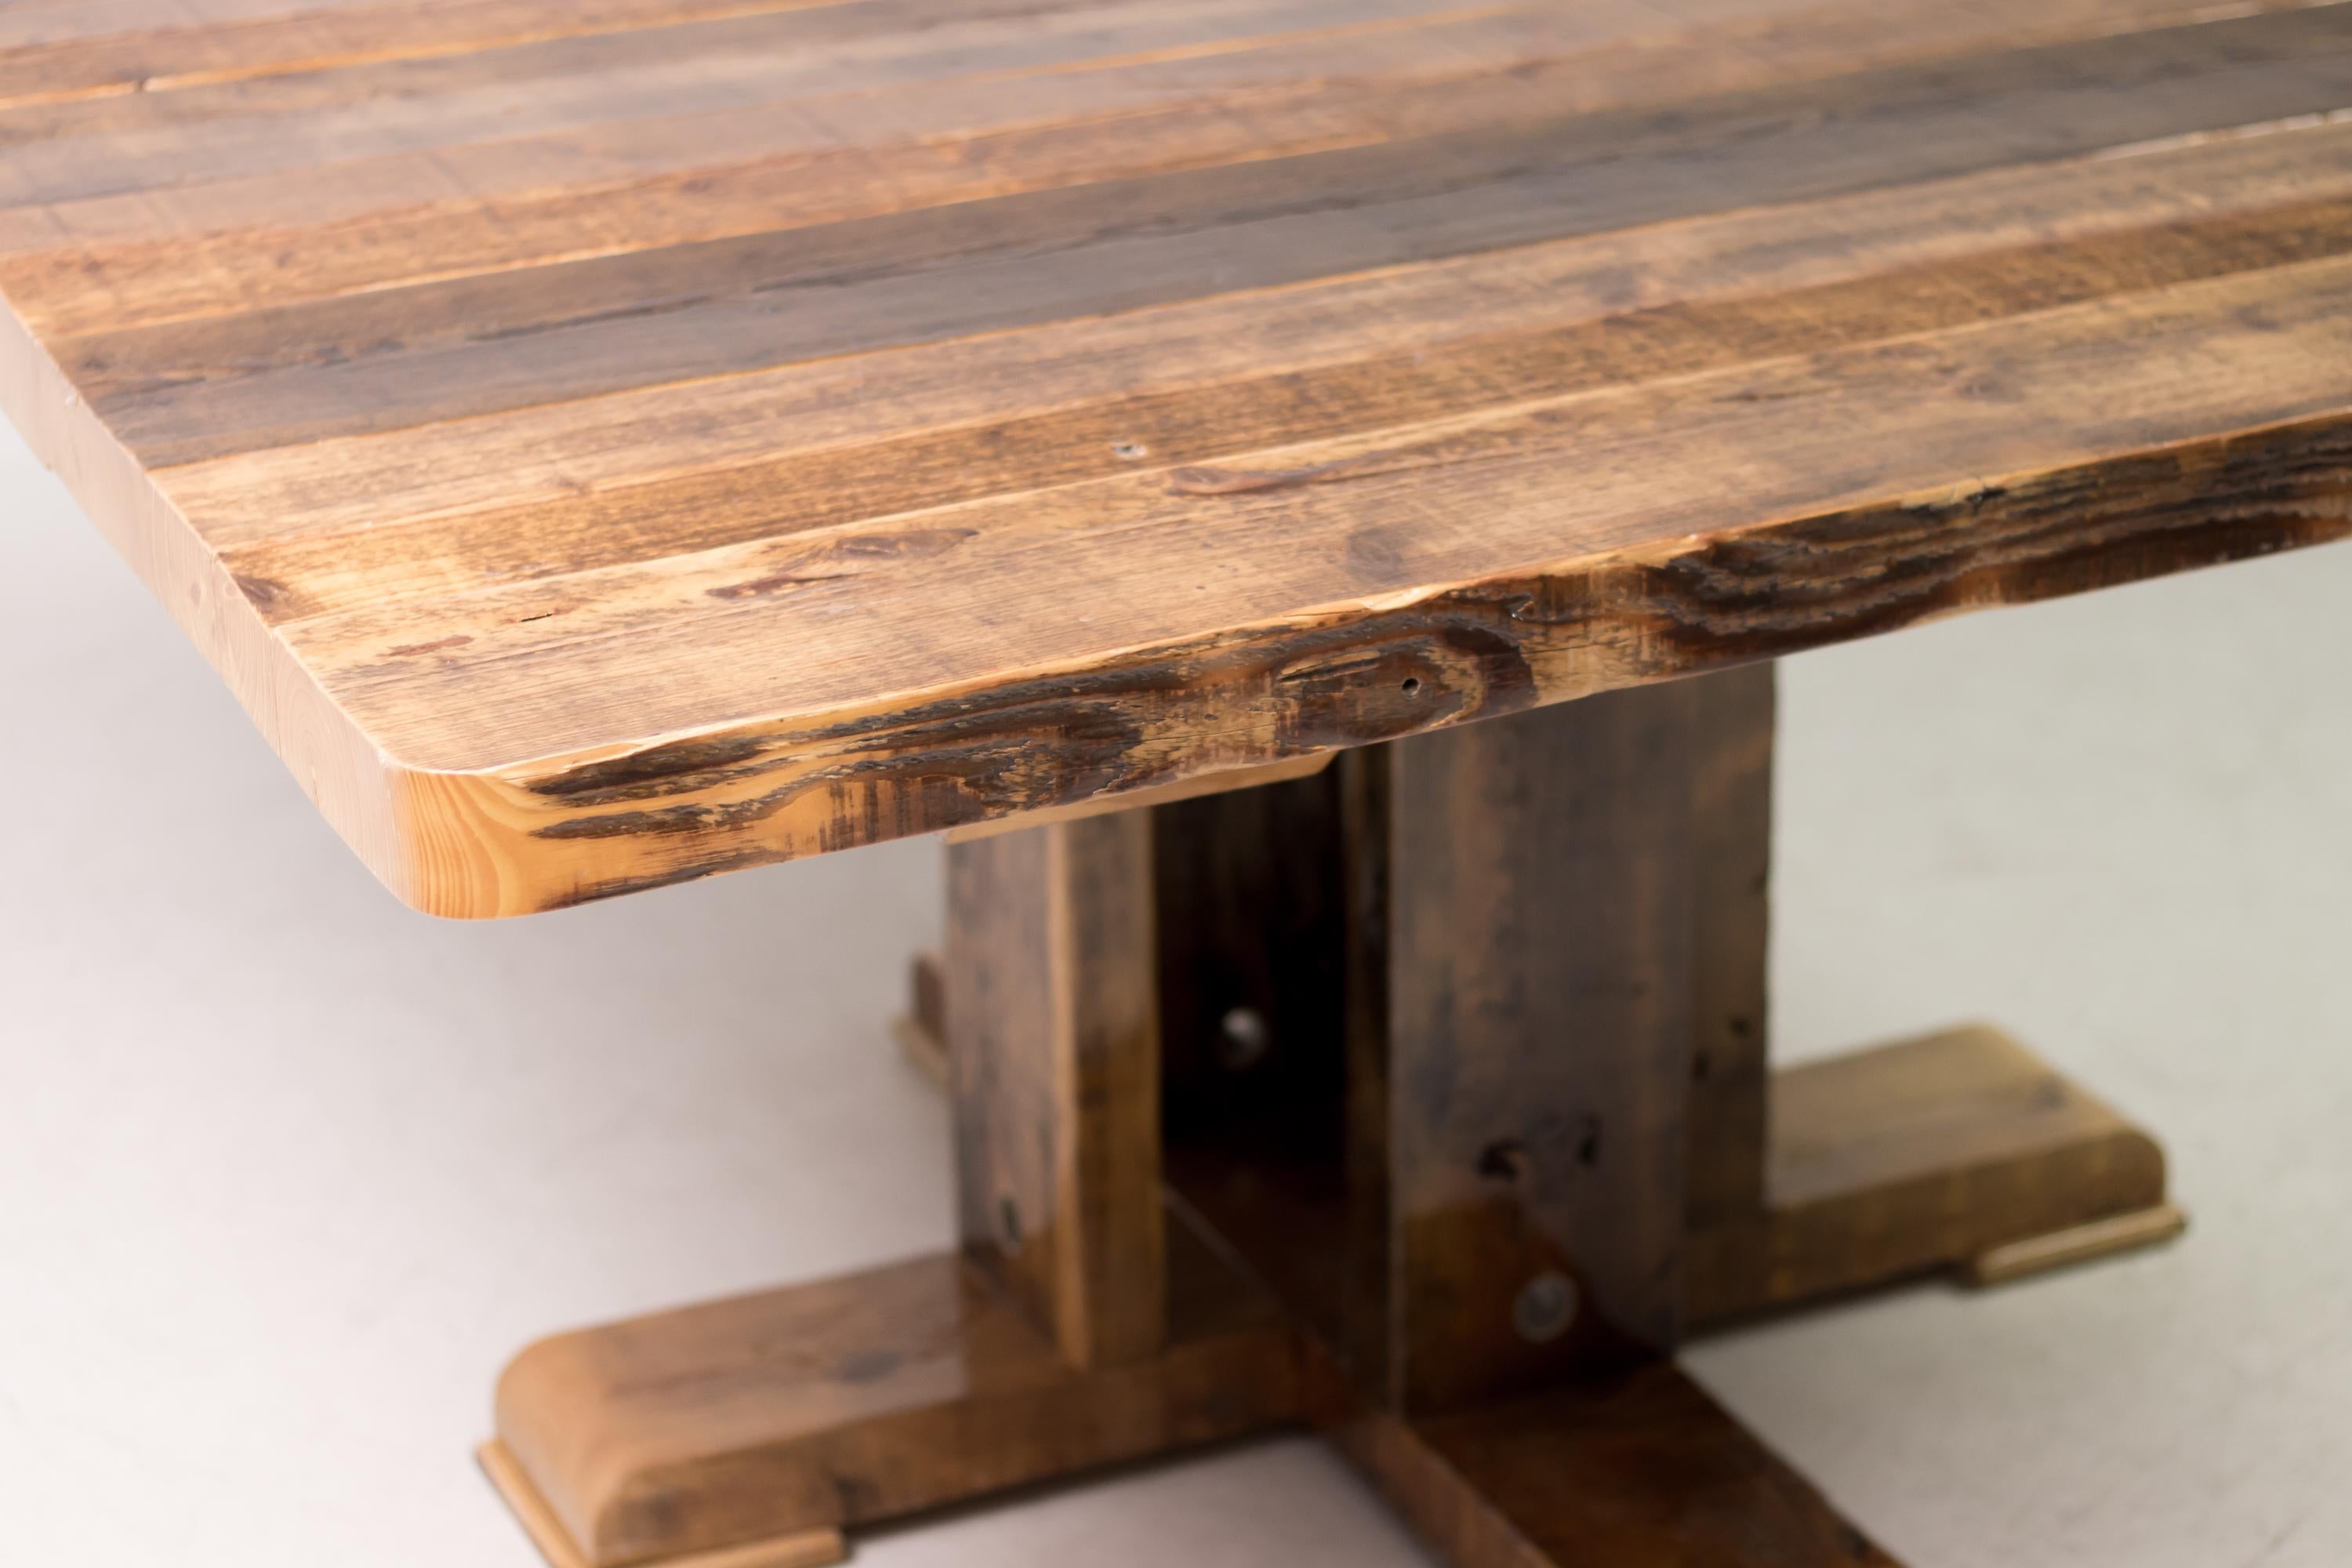 Piet Hein Eek beam table in scrap wood with a high gloss finish.
Custom made by Piet Hein Eek for previous owners because they wanted a square table for their dining room.
Piet Hein Eek (1967) graduated in 1990 from the Design Academy in